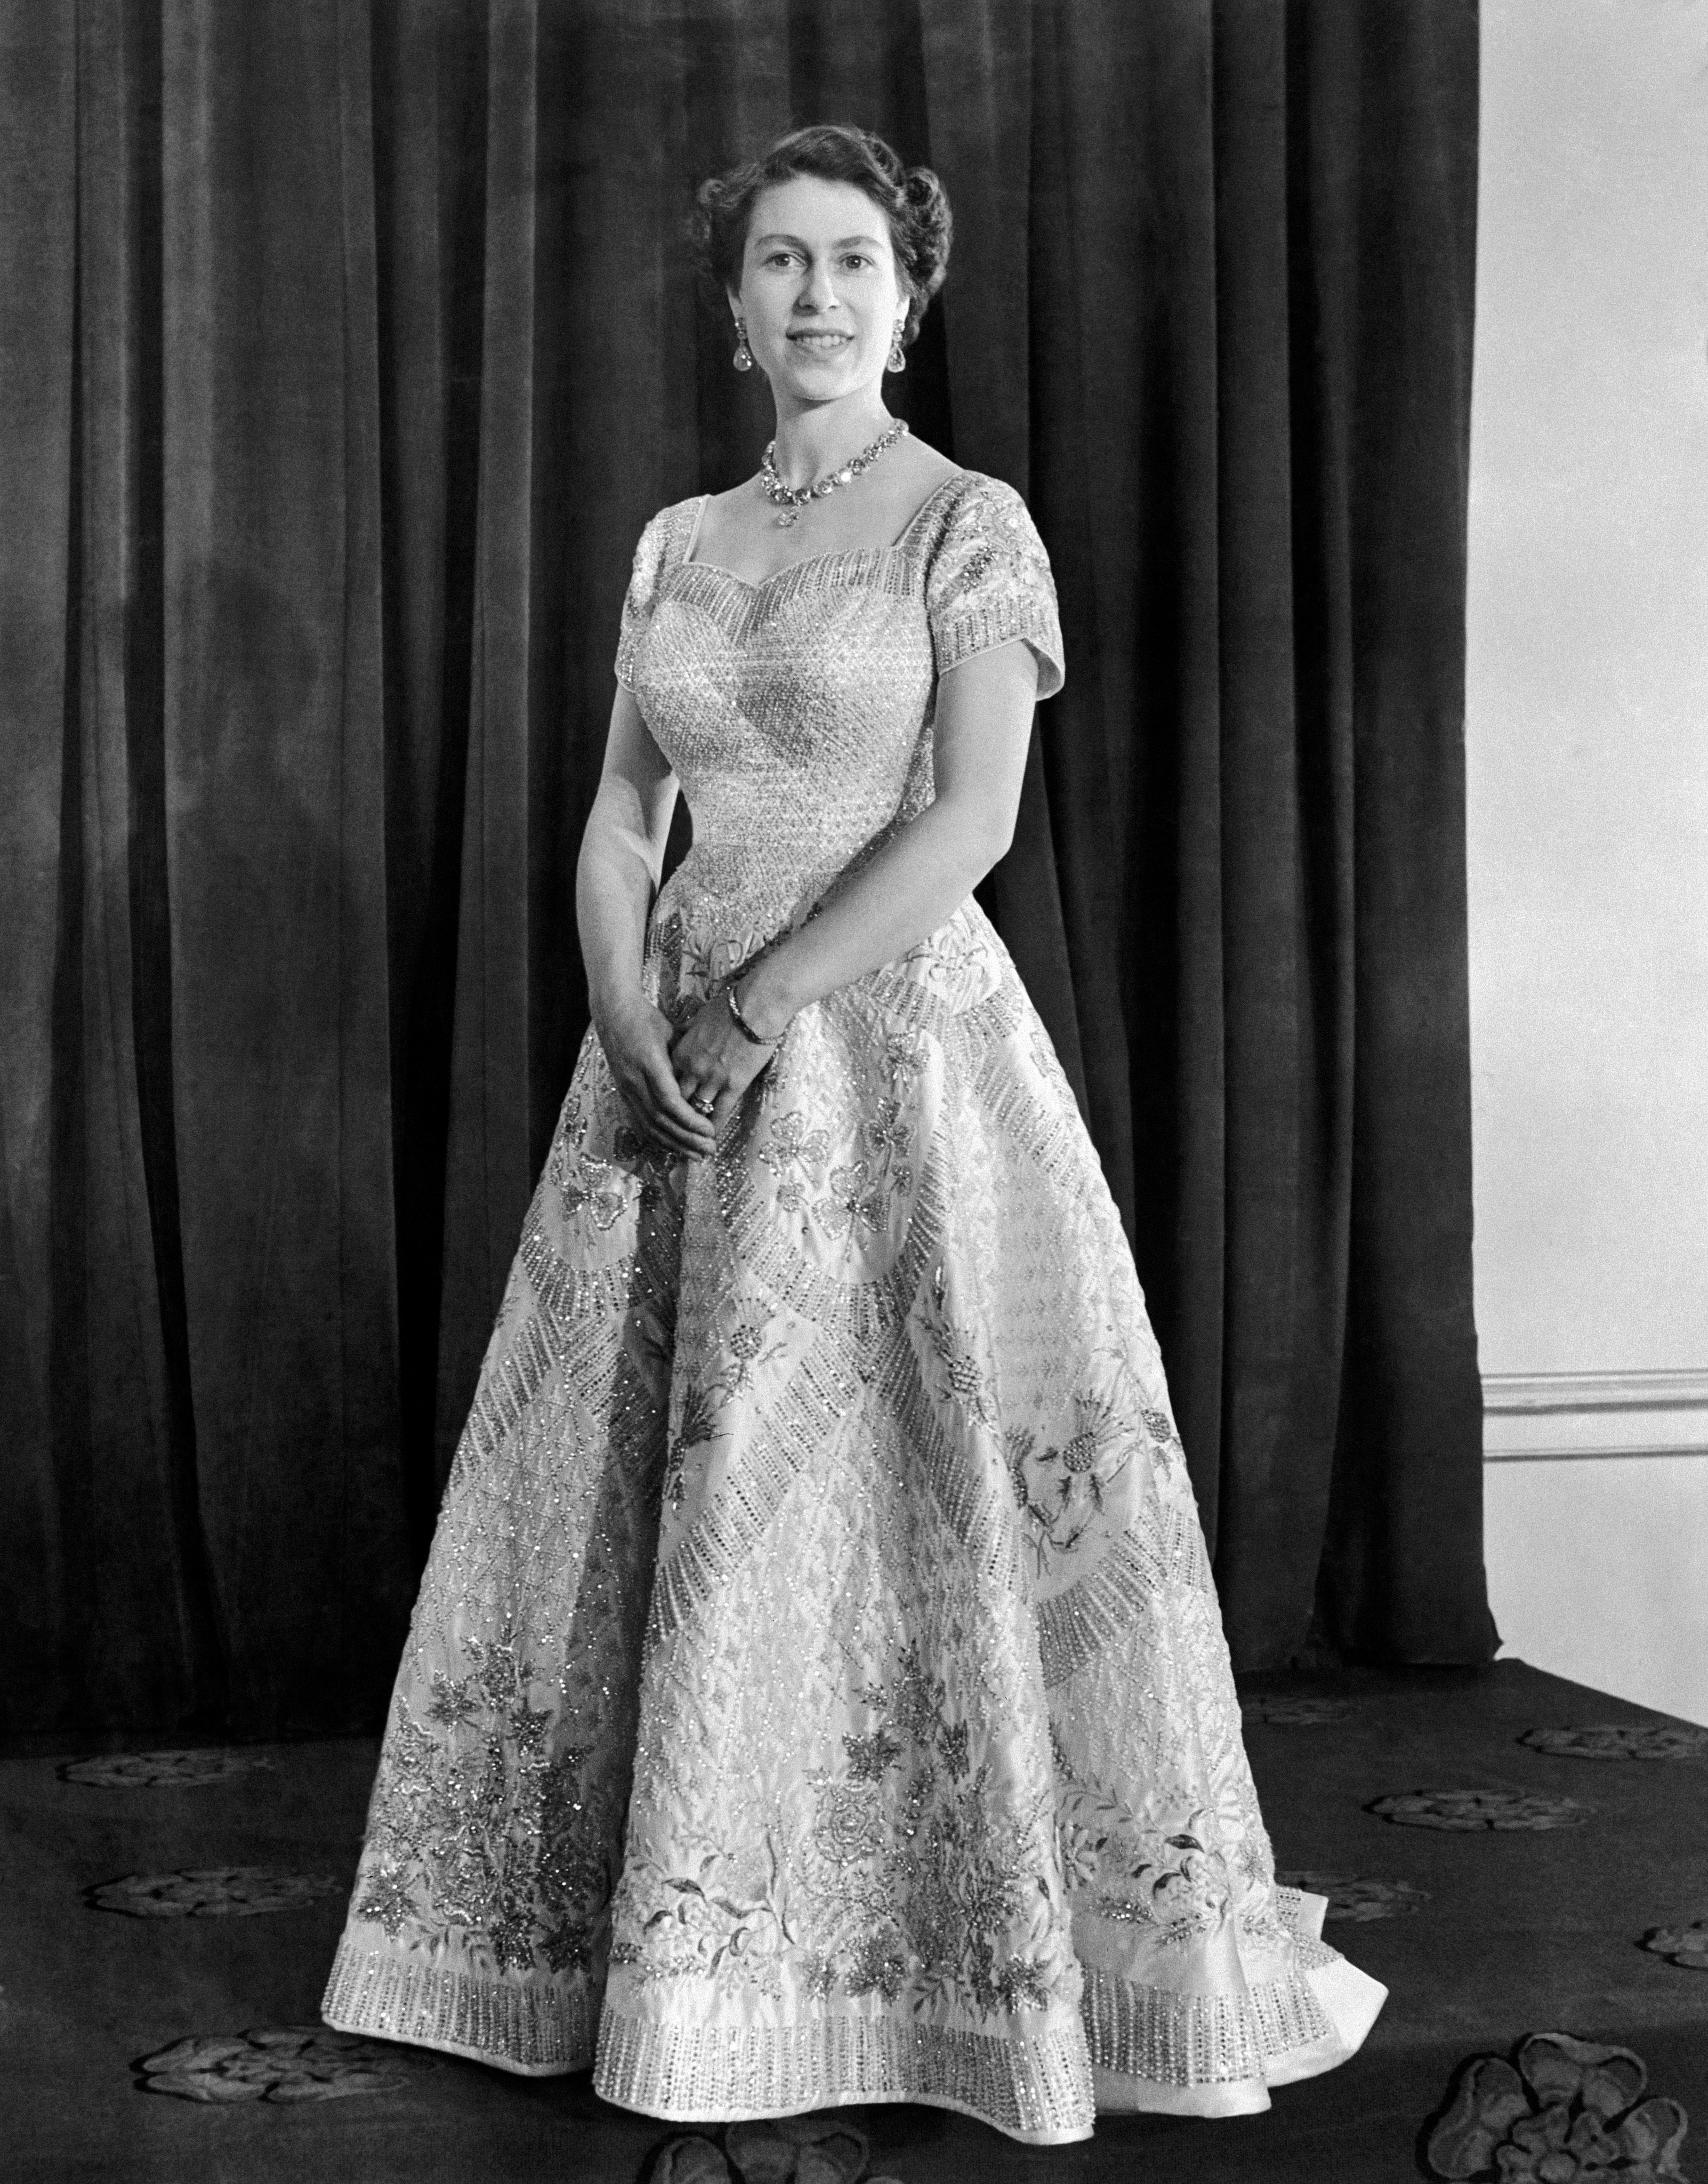 Queen Elizabeth II, wearing a gown designed by Norman Hartnell for her Coronation.